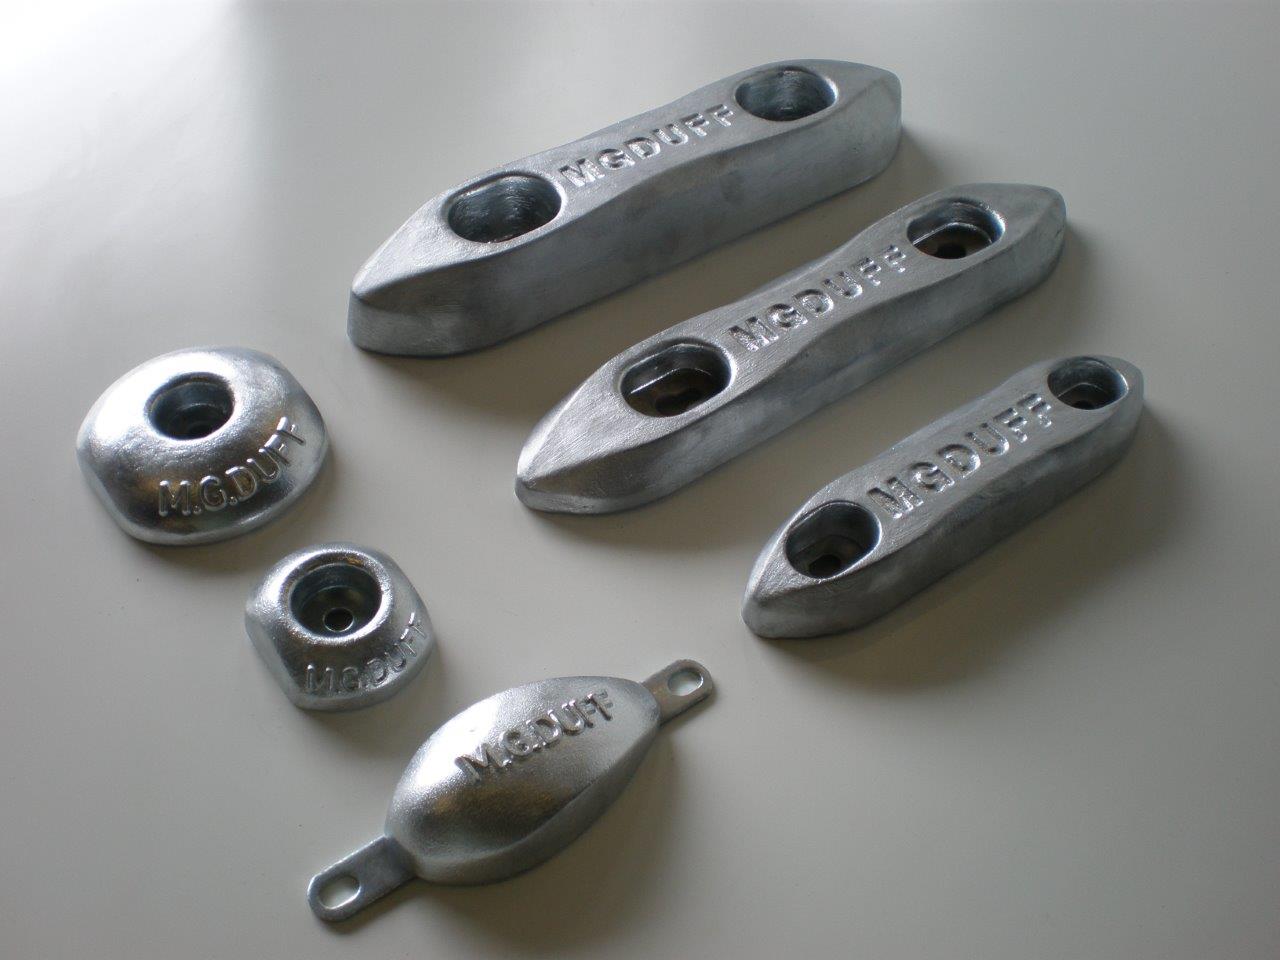 anodes from Mgduff